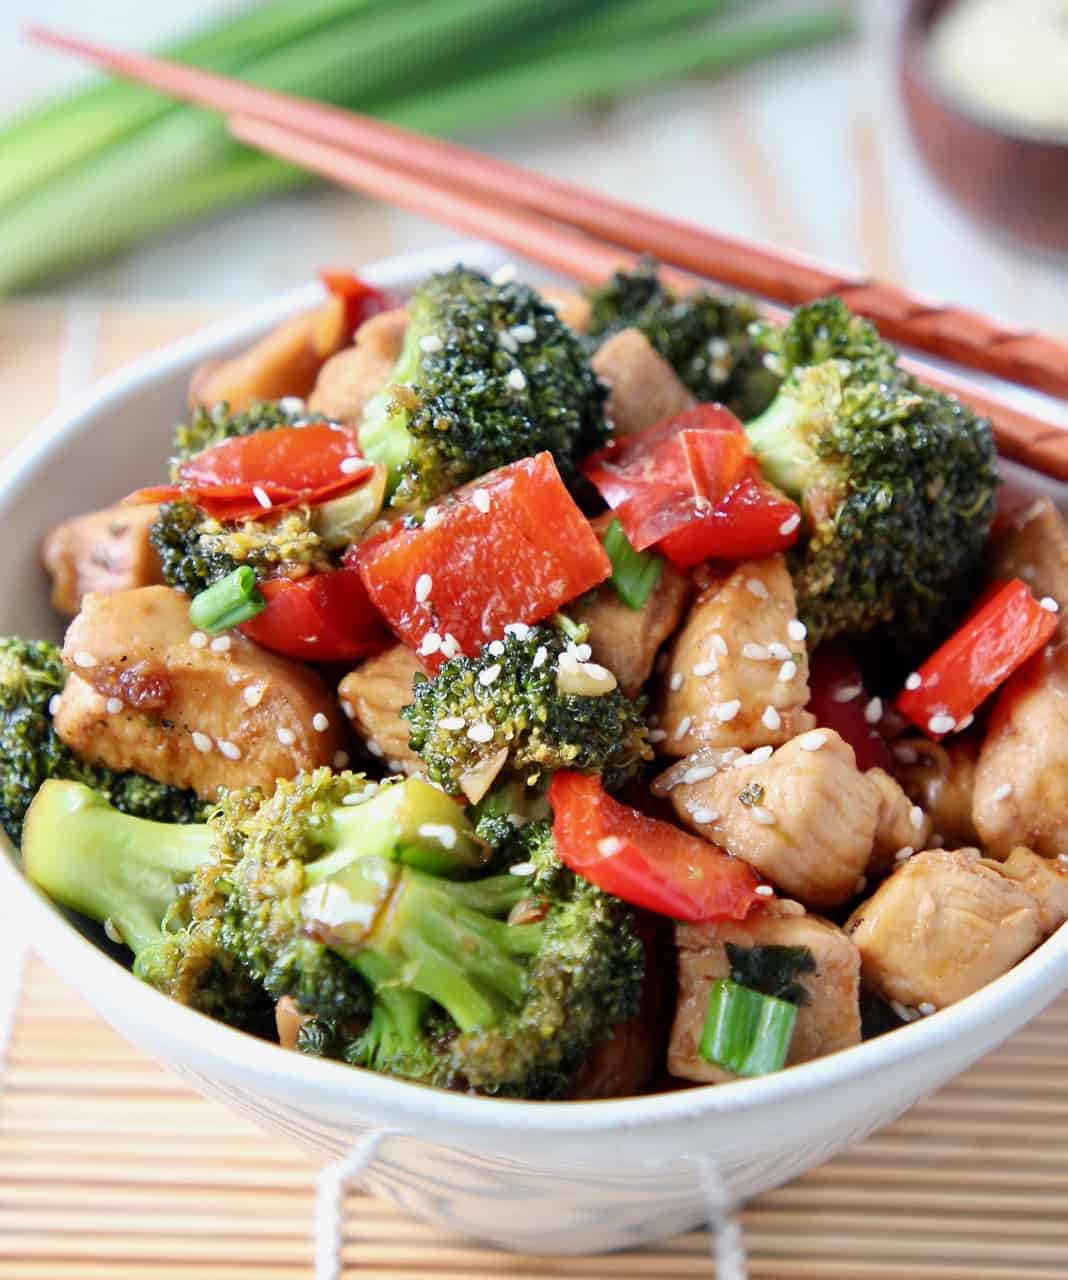 Stir fry teriyaki chicken and broccoli in white bowl with chopsticks on the side